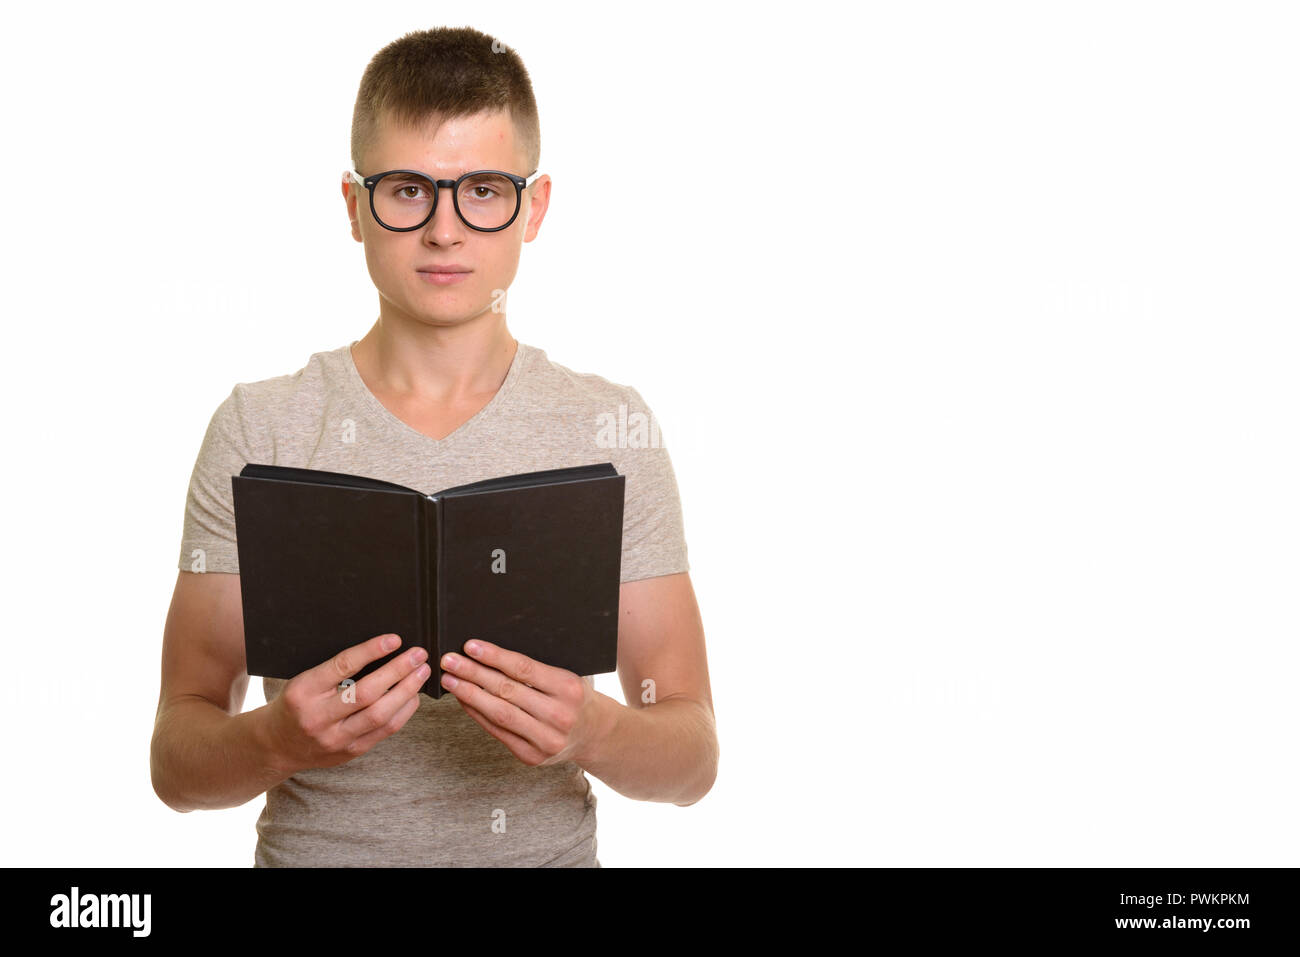 Young Caucasian nerd student man holding book Stock Photo